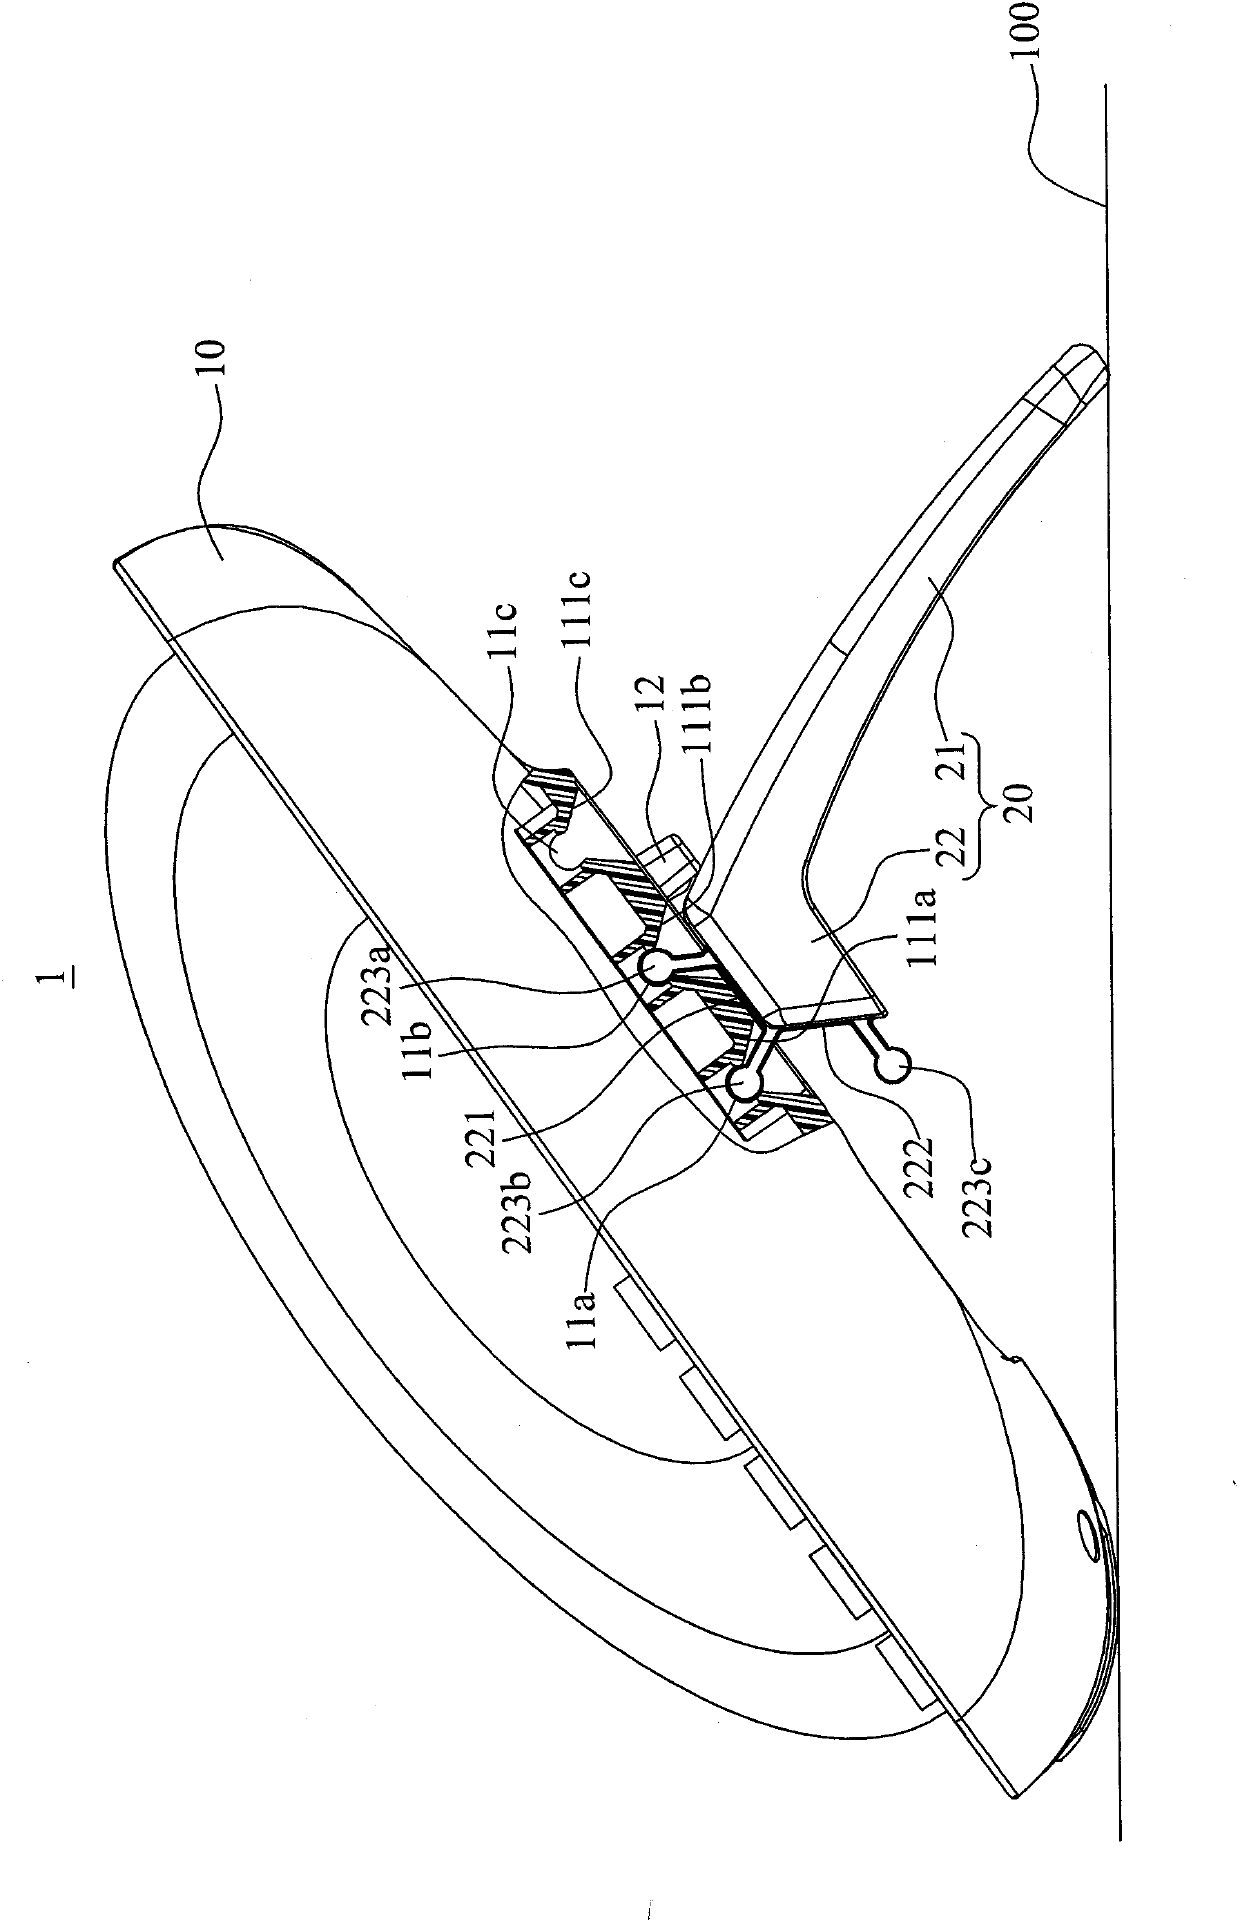 Phone structure with adjustable inclination angle